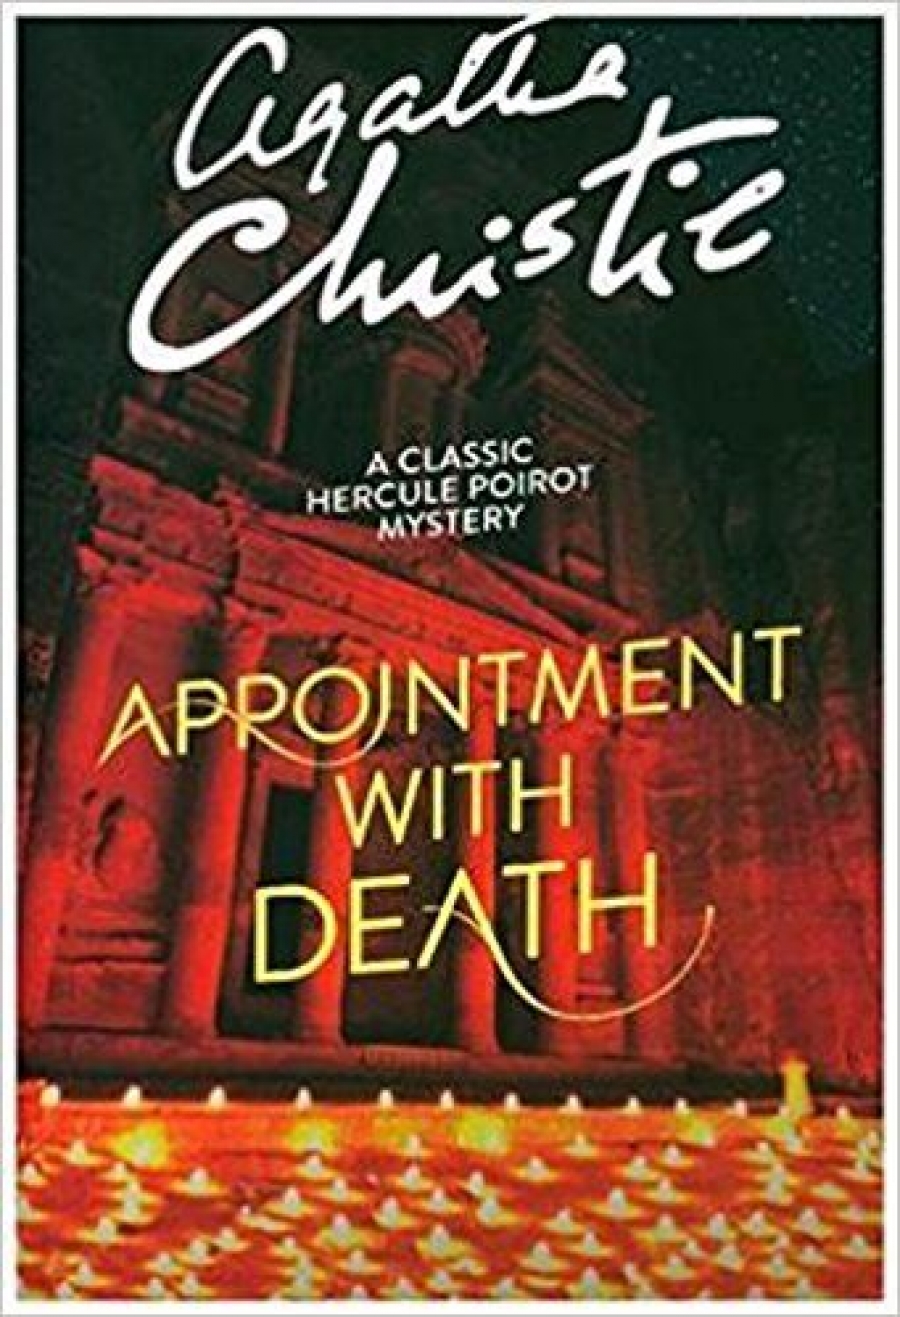 Christie Agatha Appointment with Death 